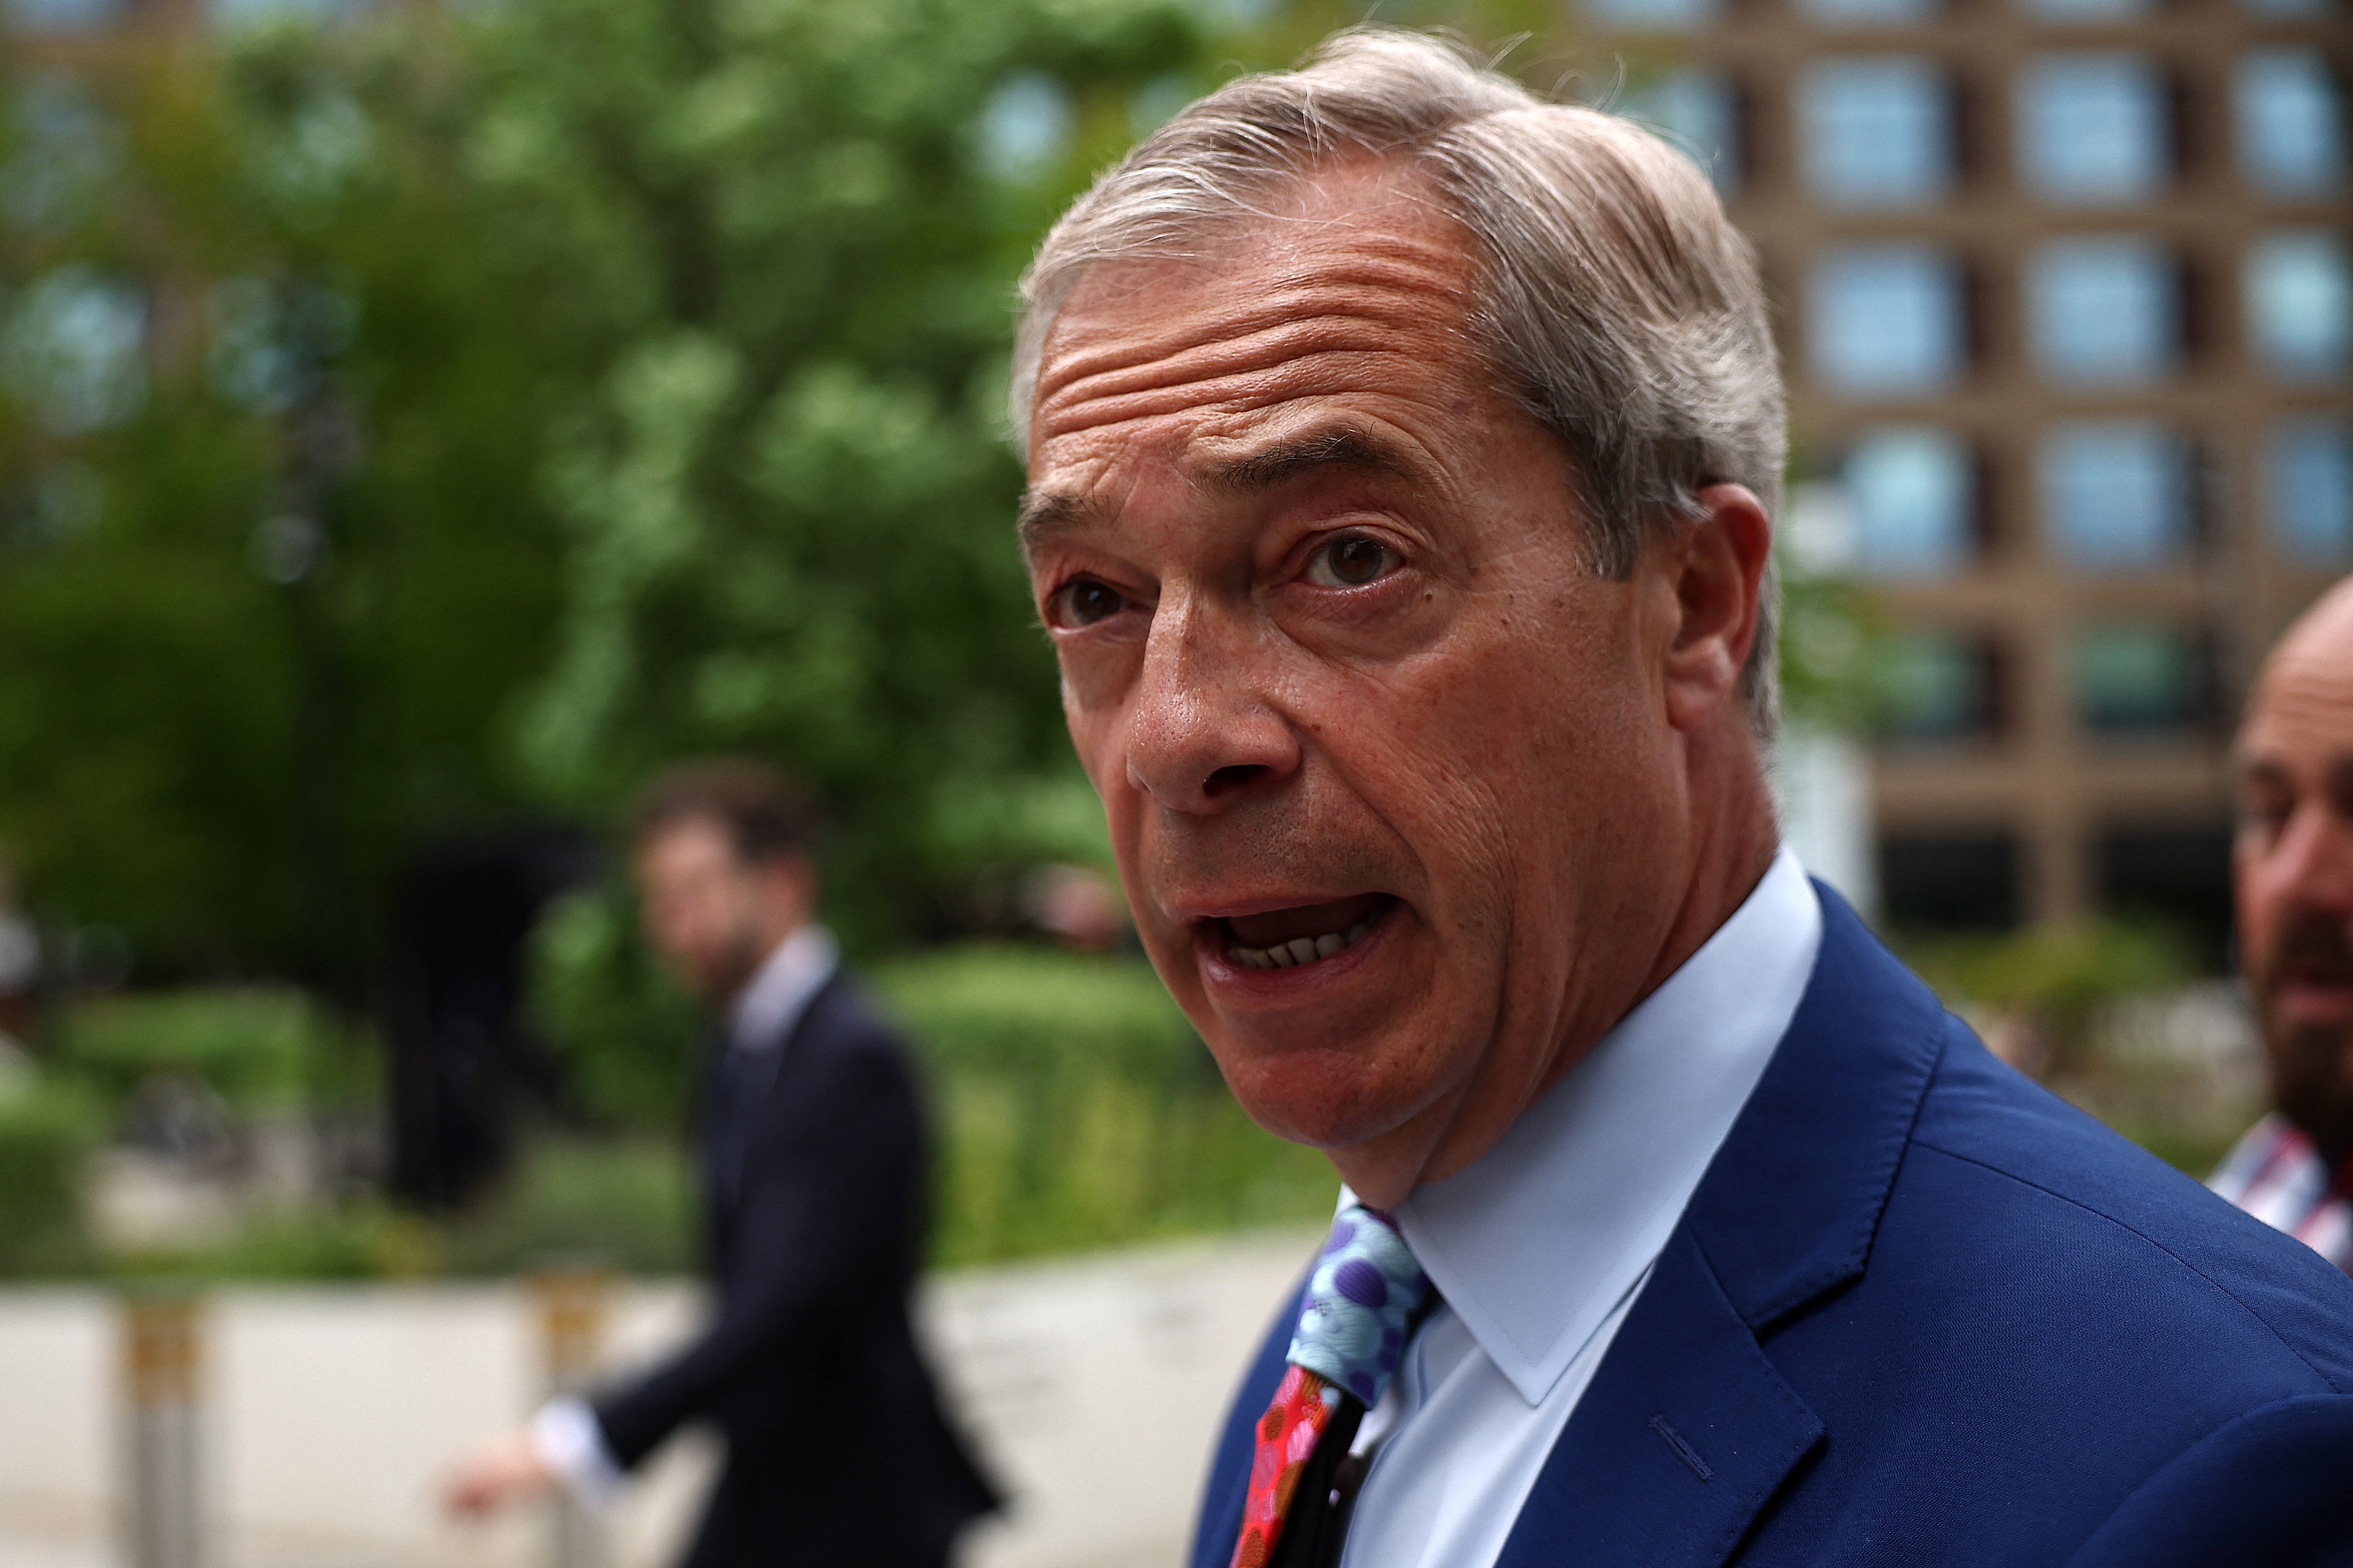 Nigel Farage says he is ‘dismayed by the reported comments’, but his critics are sceptical